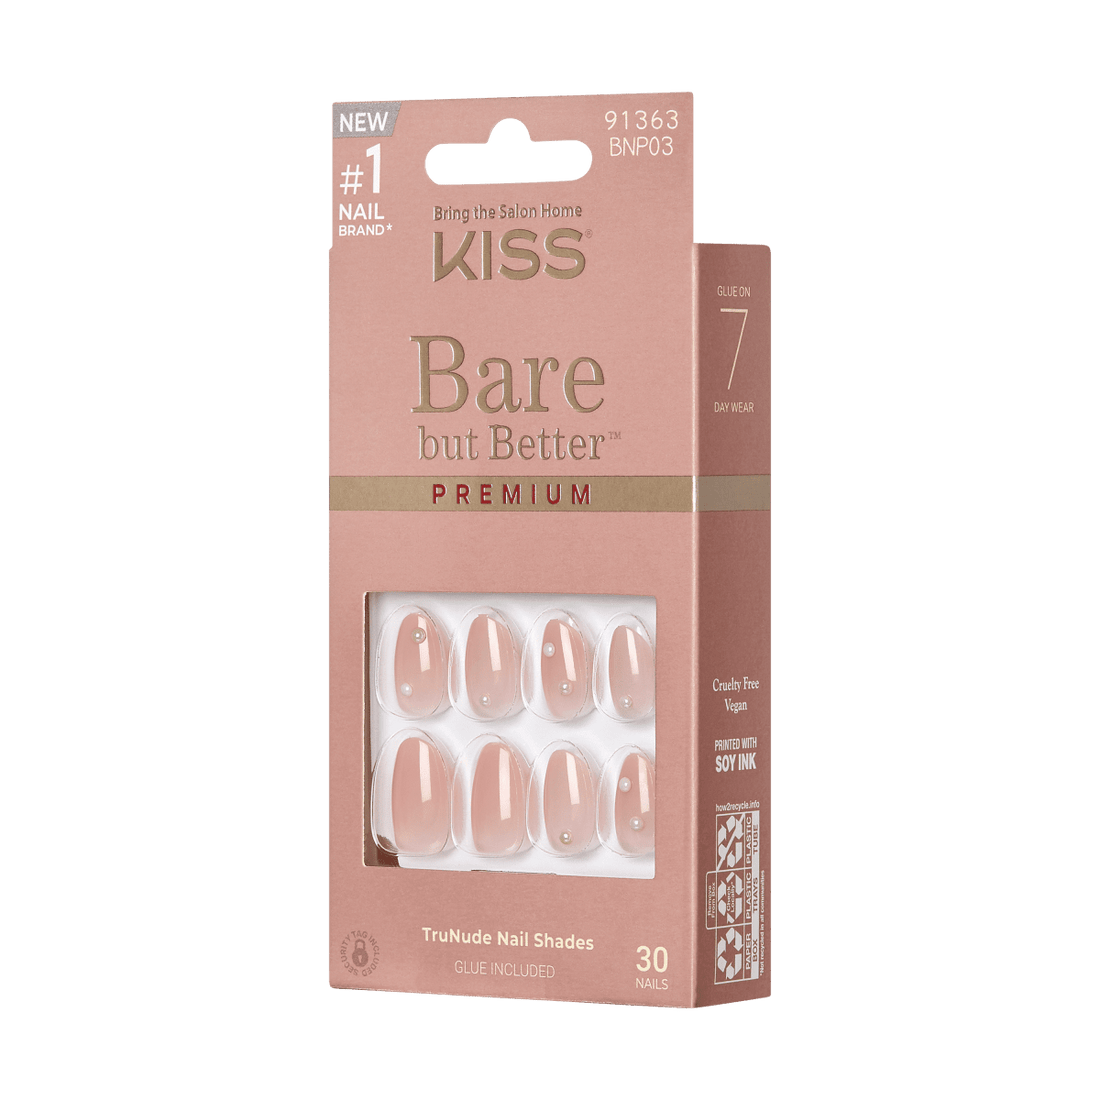 KISS Bare but Better Premium Press-On Nails, 'Chai', Nude Pink, Short  Square, 33 Ct. – KISS USA